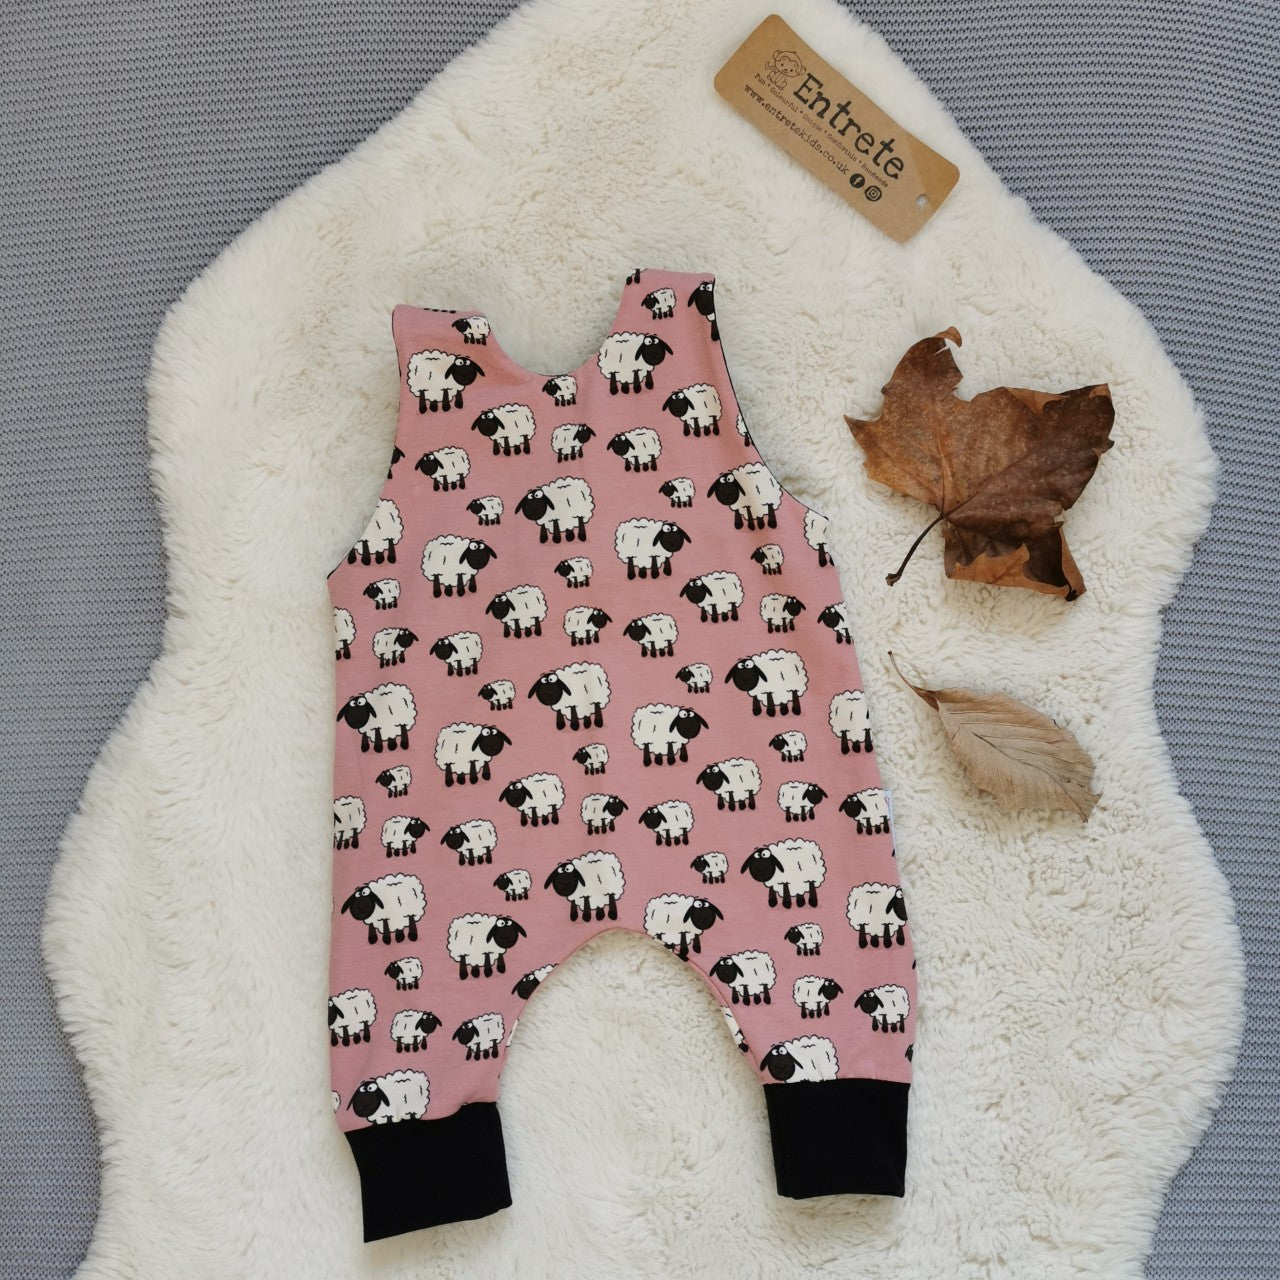 Rear of the adorably fun pink sheep romper. Handmade using pink sheep and black cotton jerseys'.